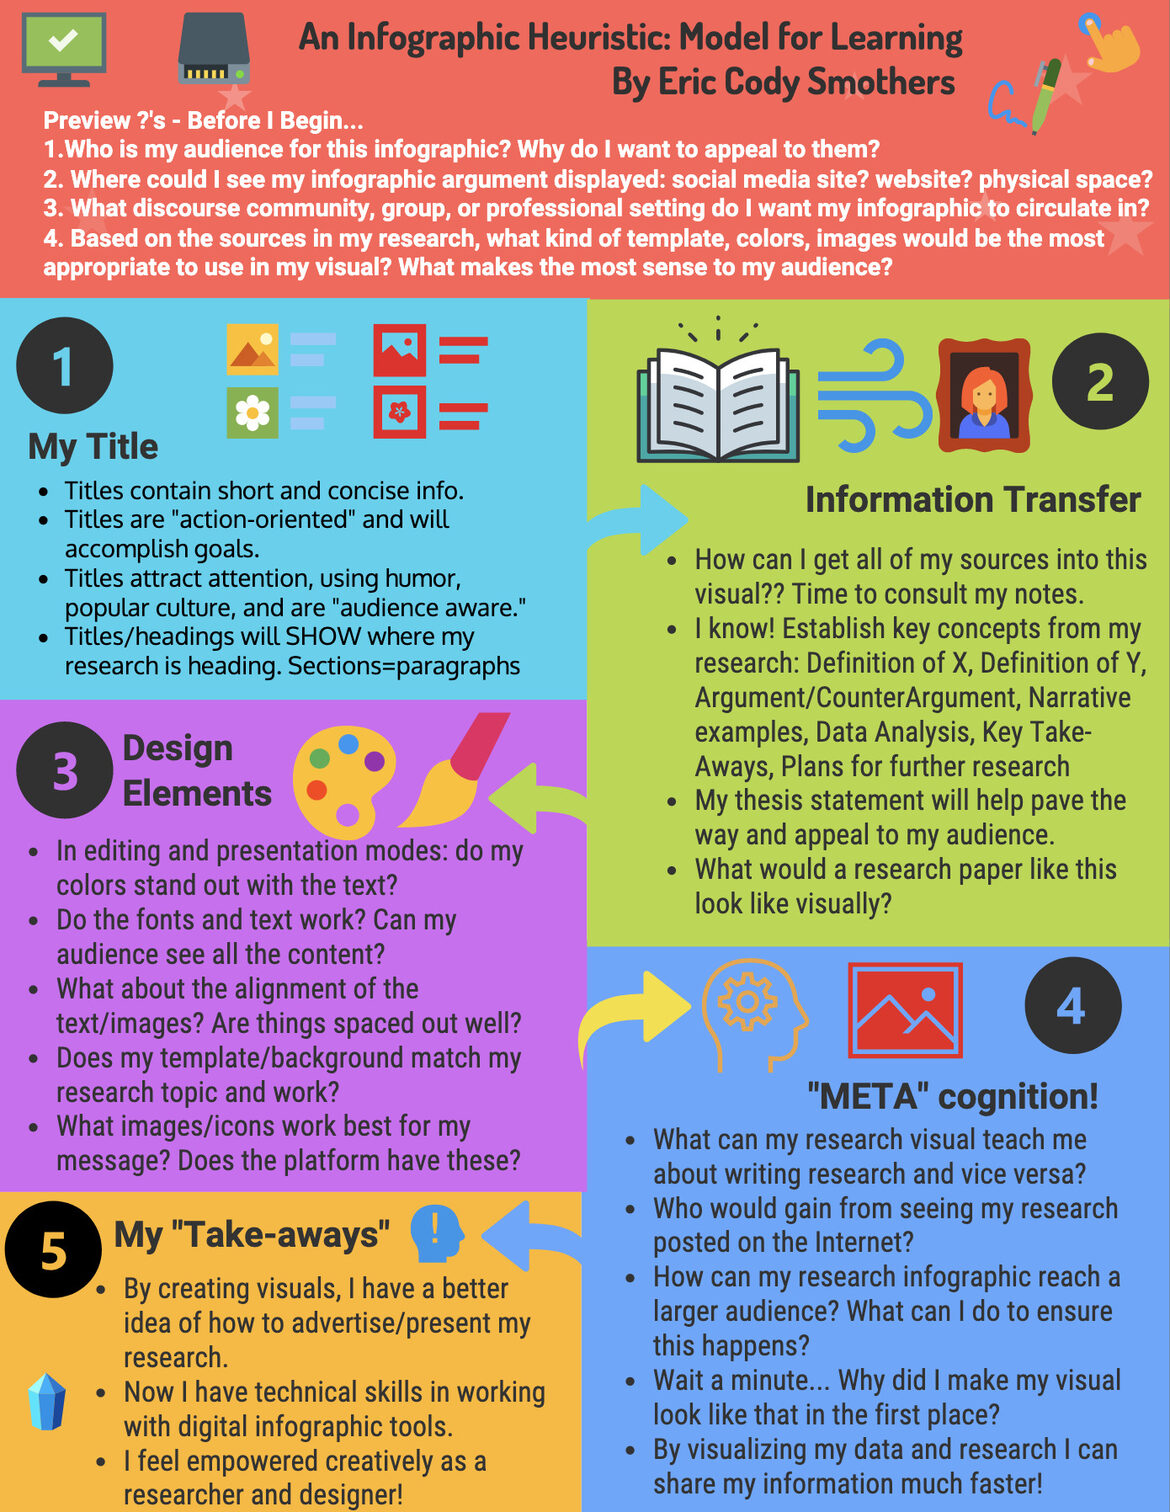 A colorful infographic providing an infographic heuristic: Model for learning that includes the title, information transfer, design elements, Meta cognition, and takeaways.